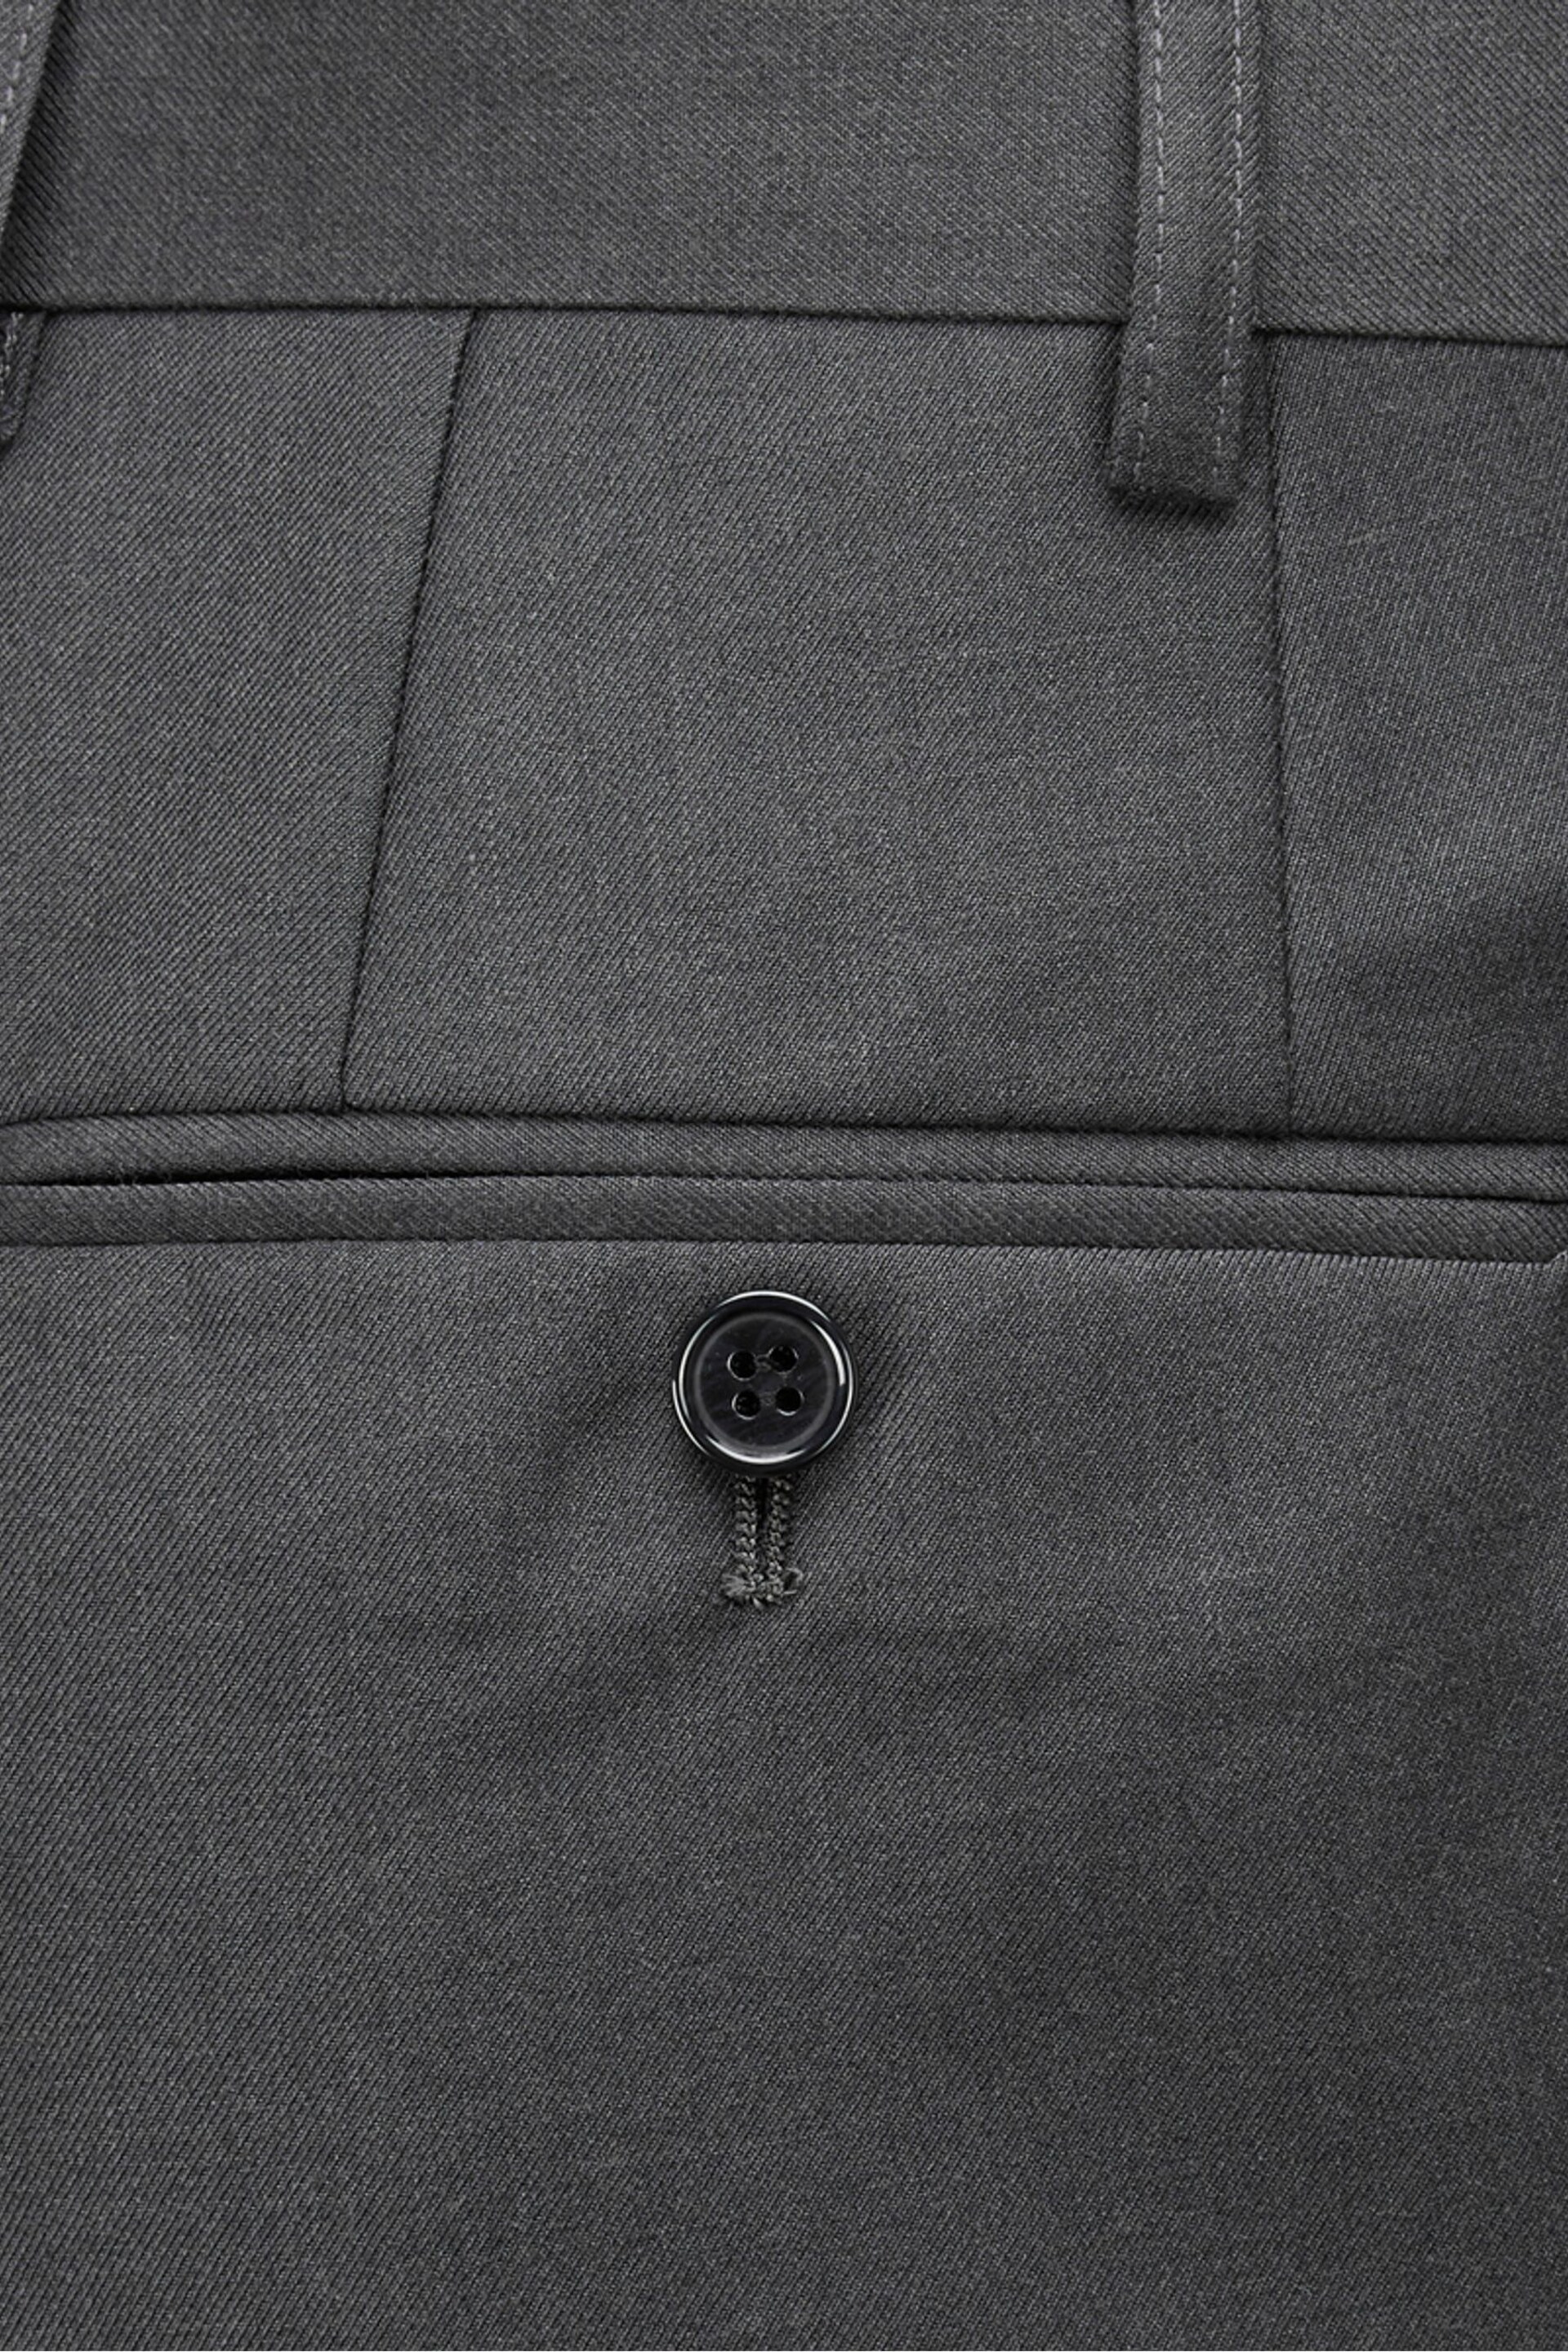 Skopes Tailored Fit Grey Madrid Charcoal Suit Trousers - Image 4 of 4